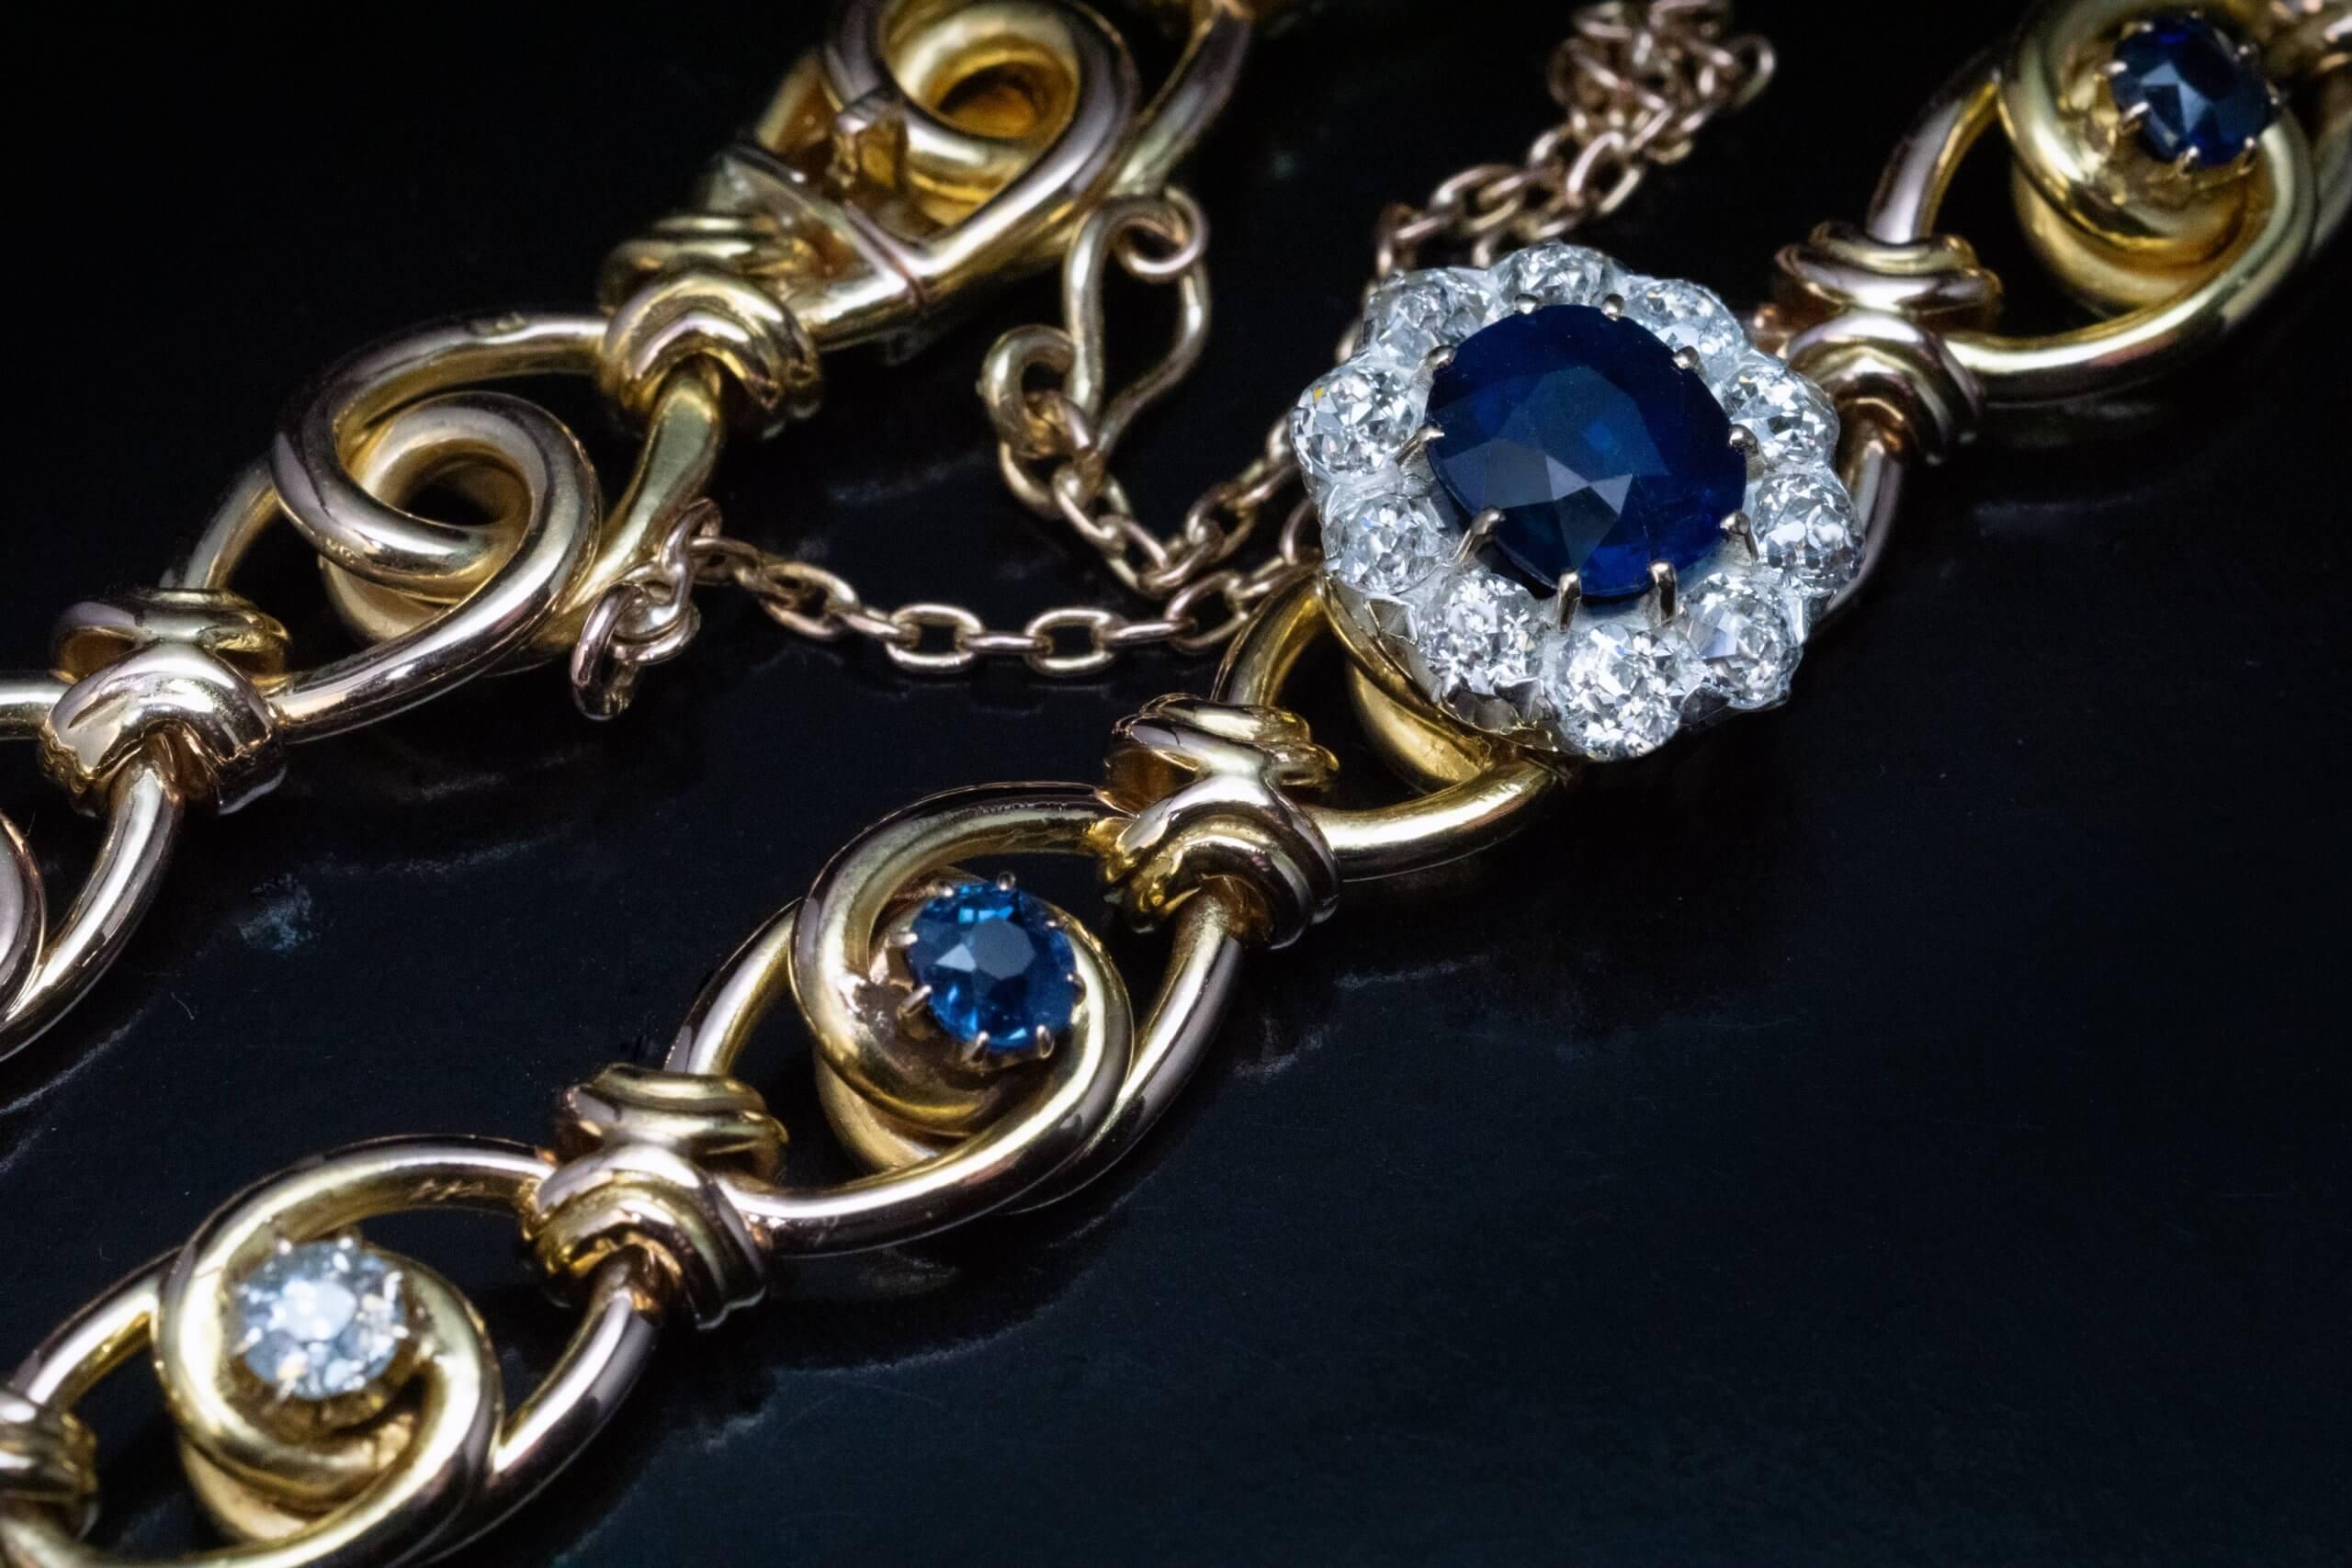 Circa 1890s  The 14K yellow gold link bracelet is centered with a midnight blue sapphire surrounded by sparkling old mine cut diamonds (set in silver over gold). The sapphire and diamond cluster is flanked by two small sapphires and two diamonds. 